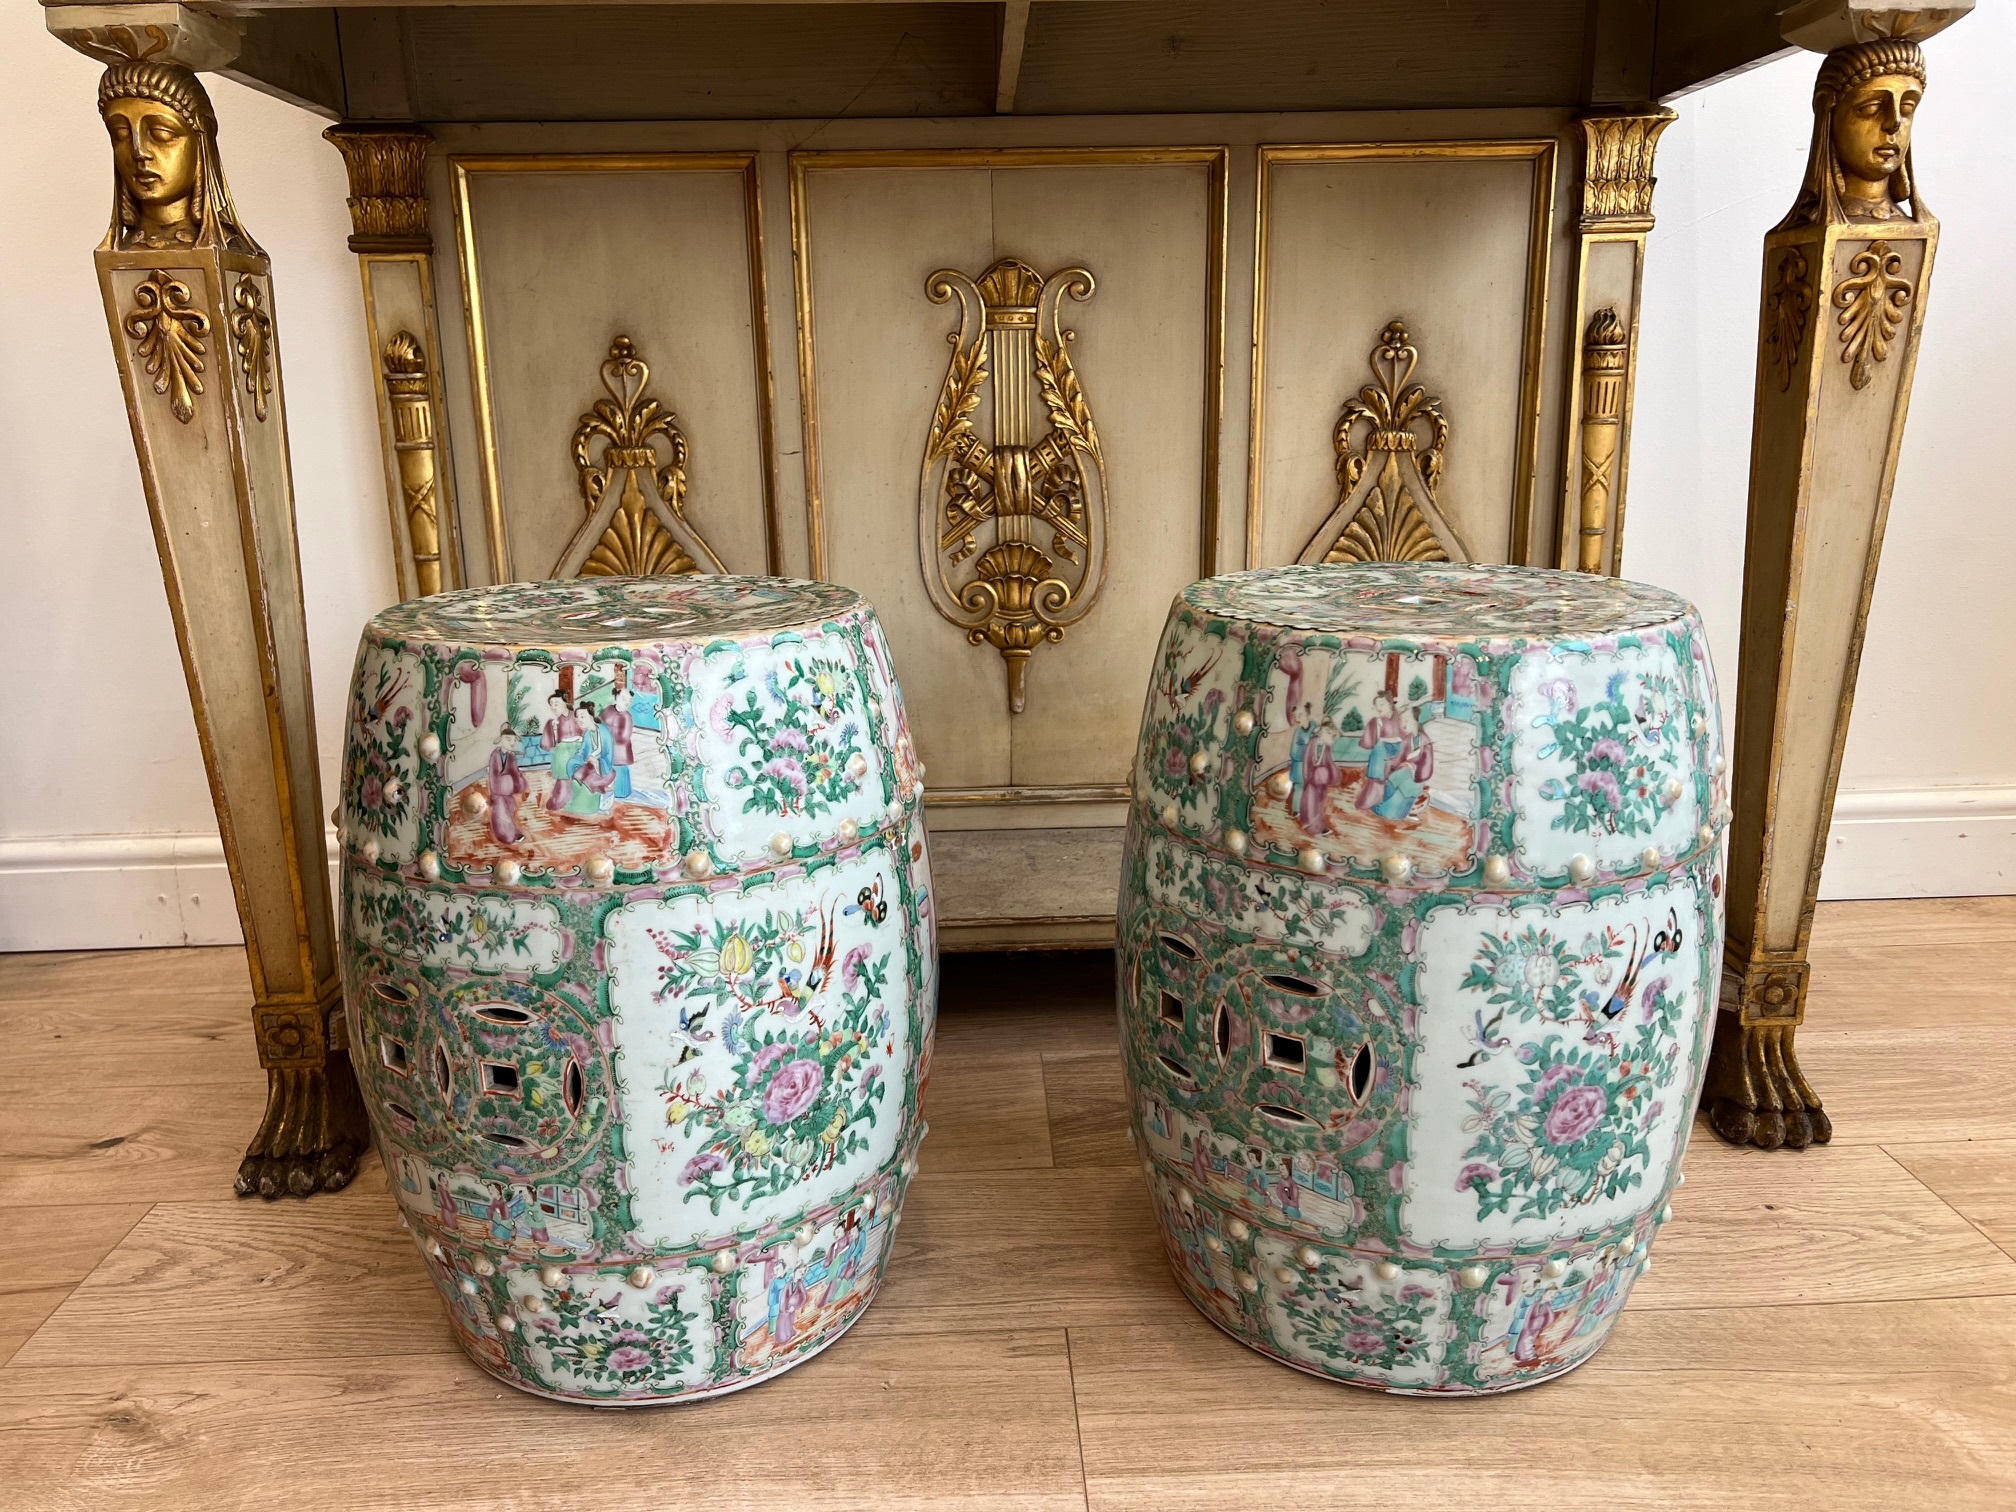 A PAIR OF 19TH CENTURY CHINESE FAMILLE ROSE PORCELAIN GARDEN SEATS - Image 10 of 12